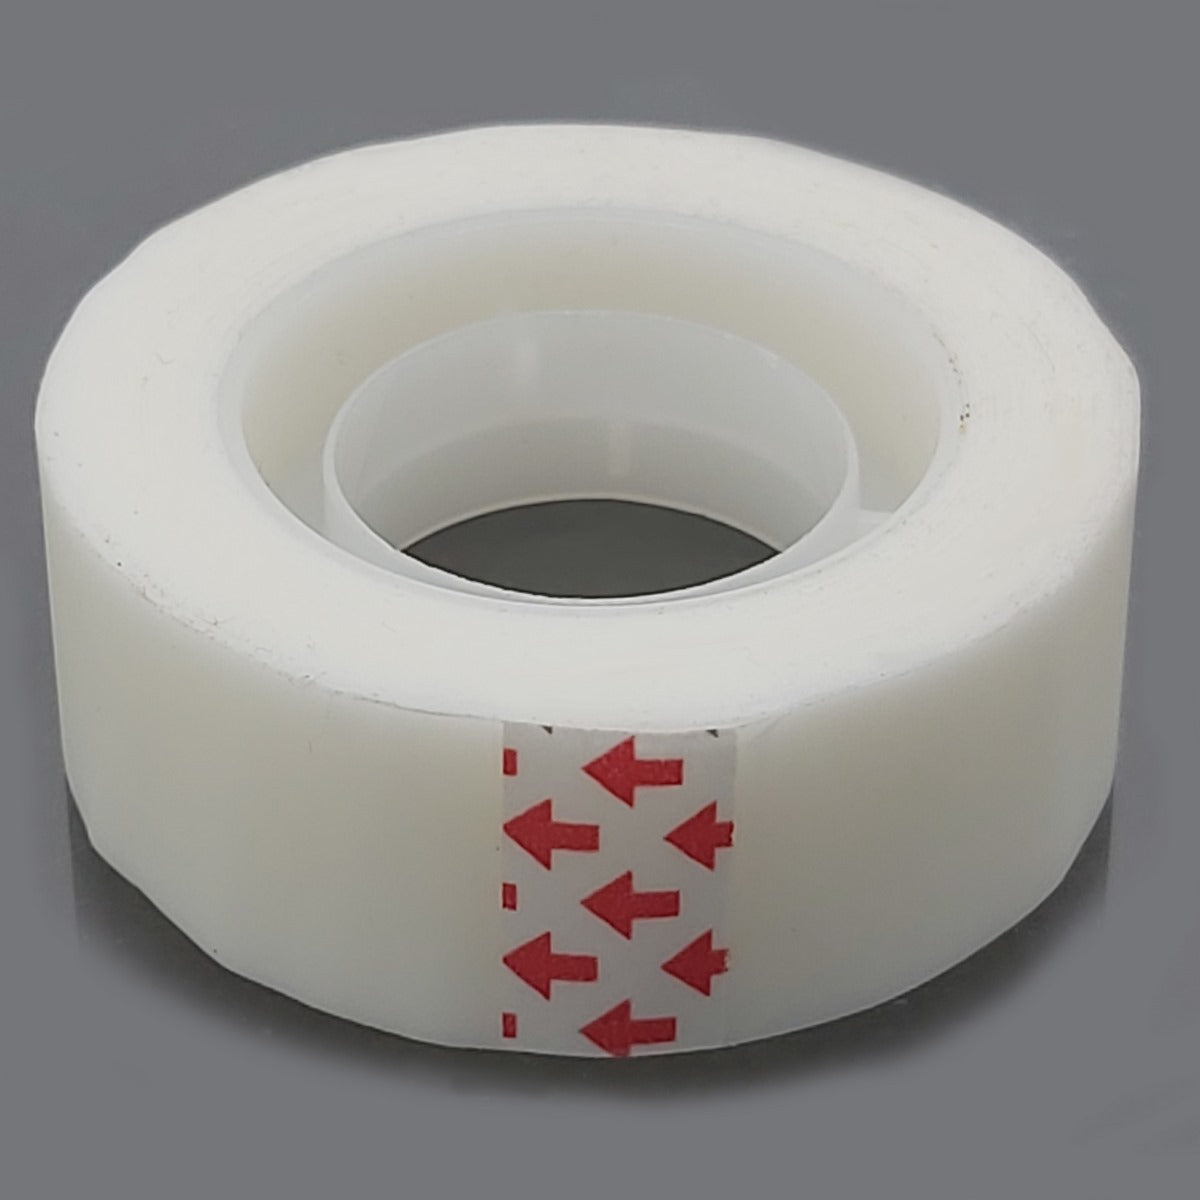 jags-mumbai Tape Invisible Tape Easy to Remove Craft Tape Glueless Tape